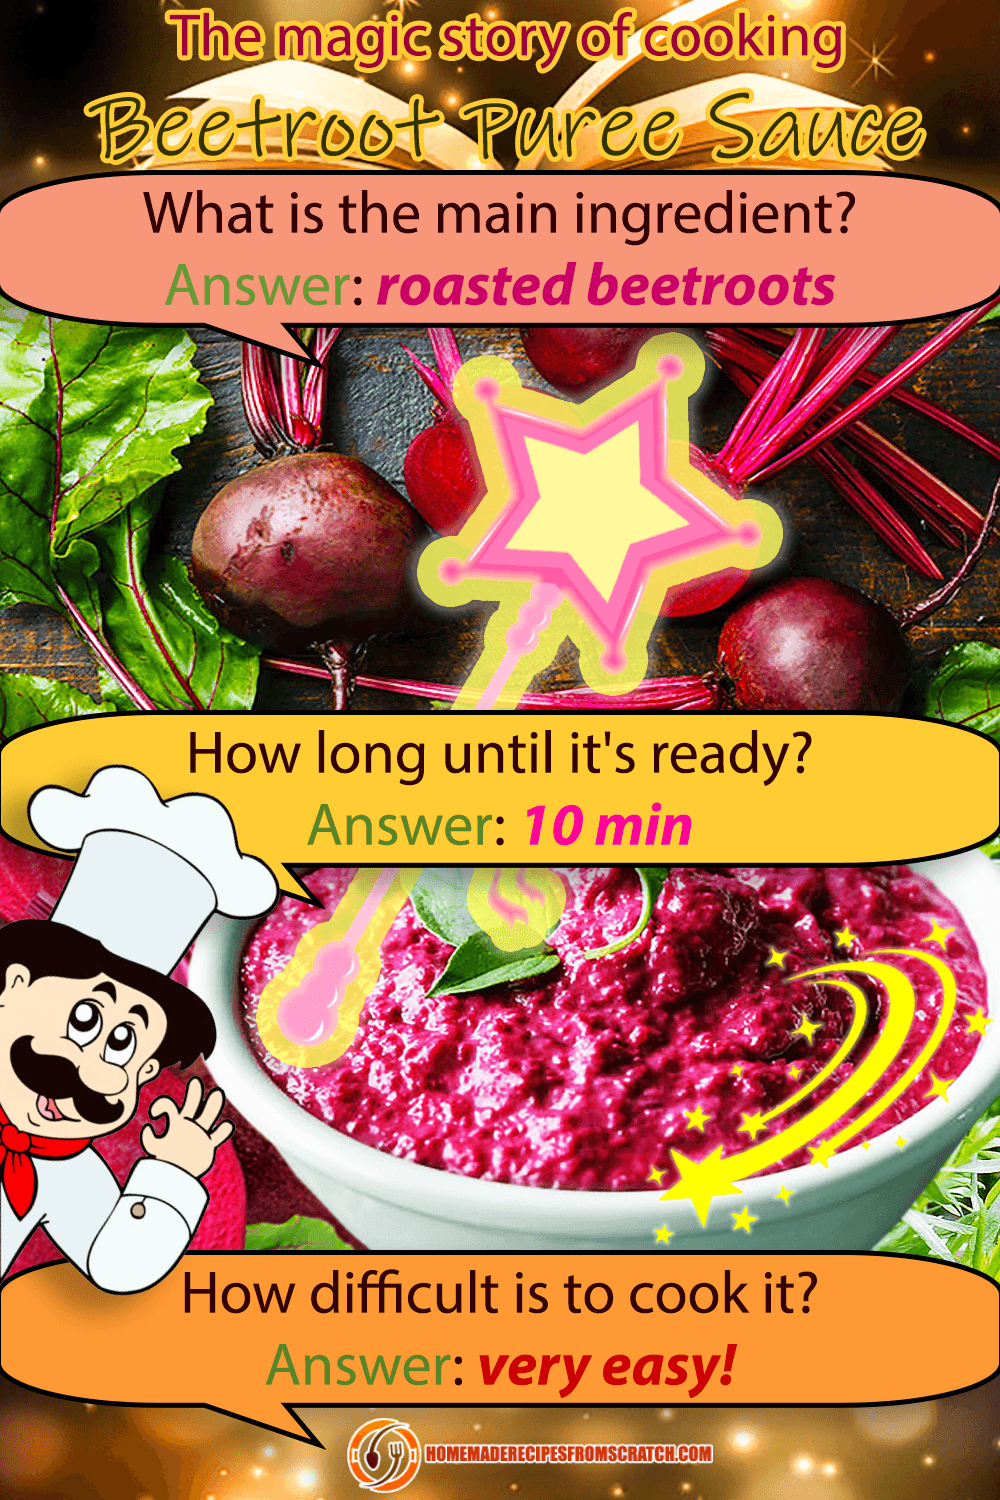 The Magic Story of Cooking Roasted Beet Puree Sauce